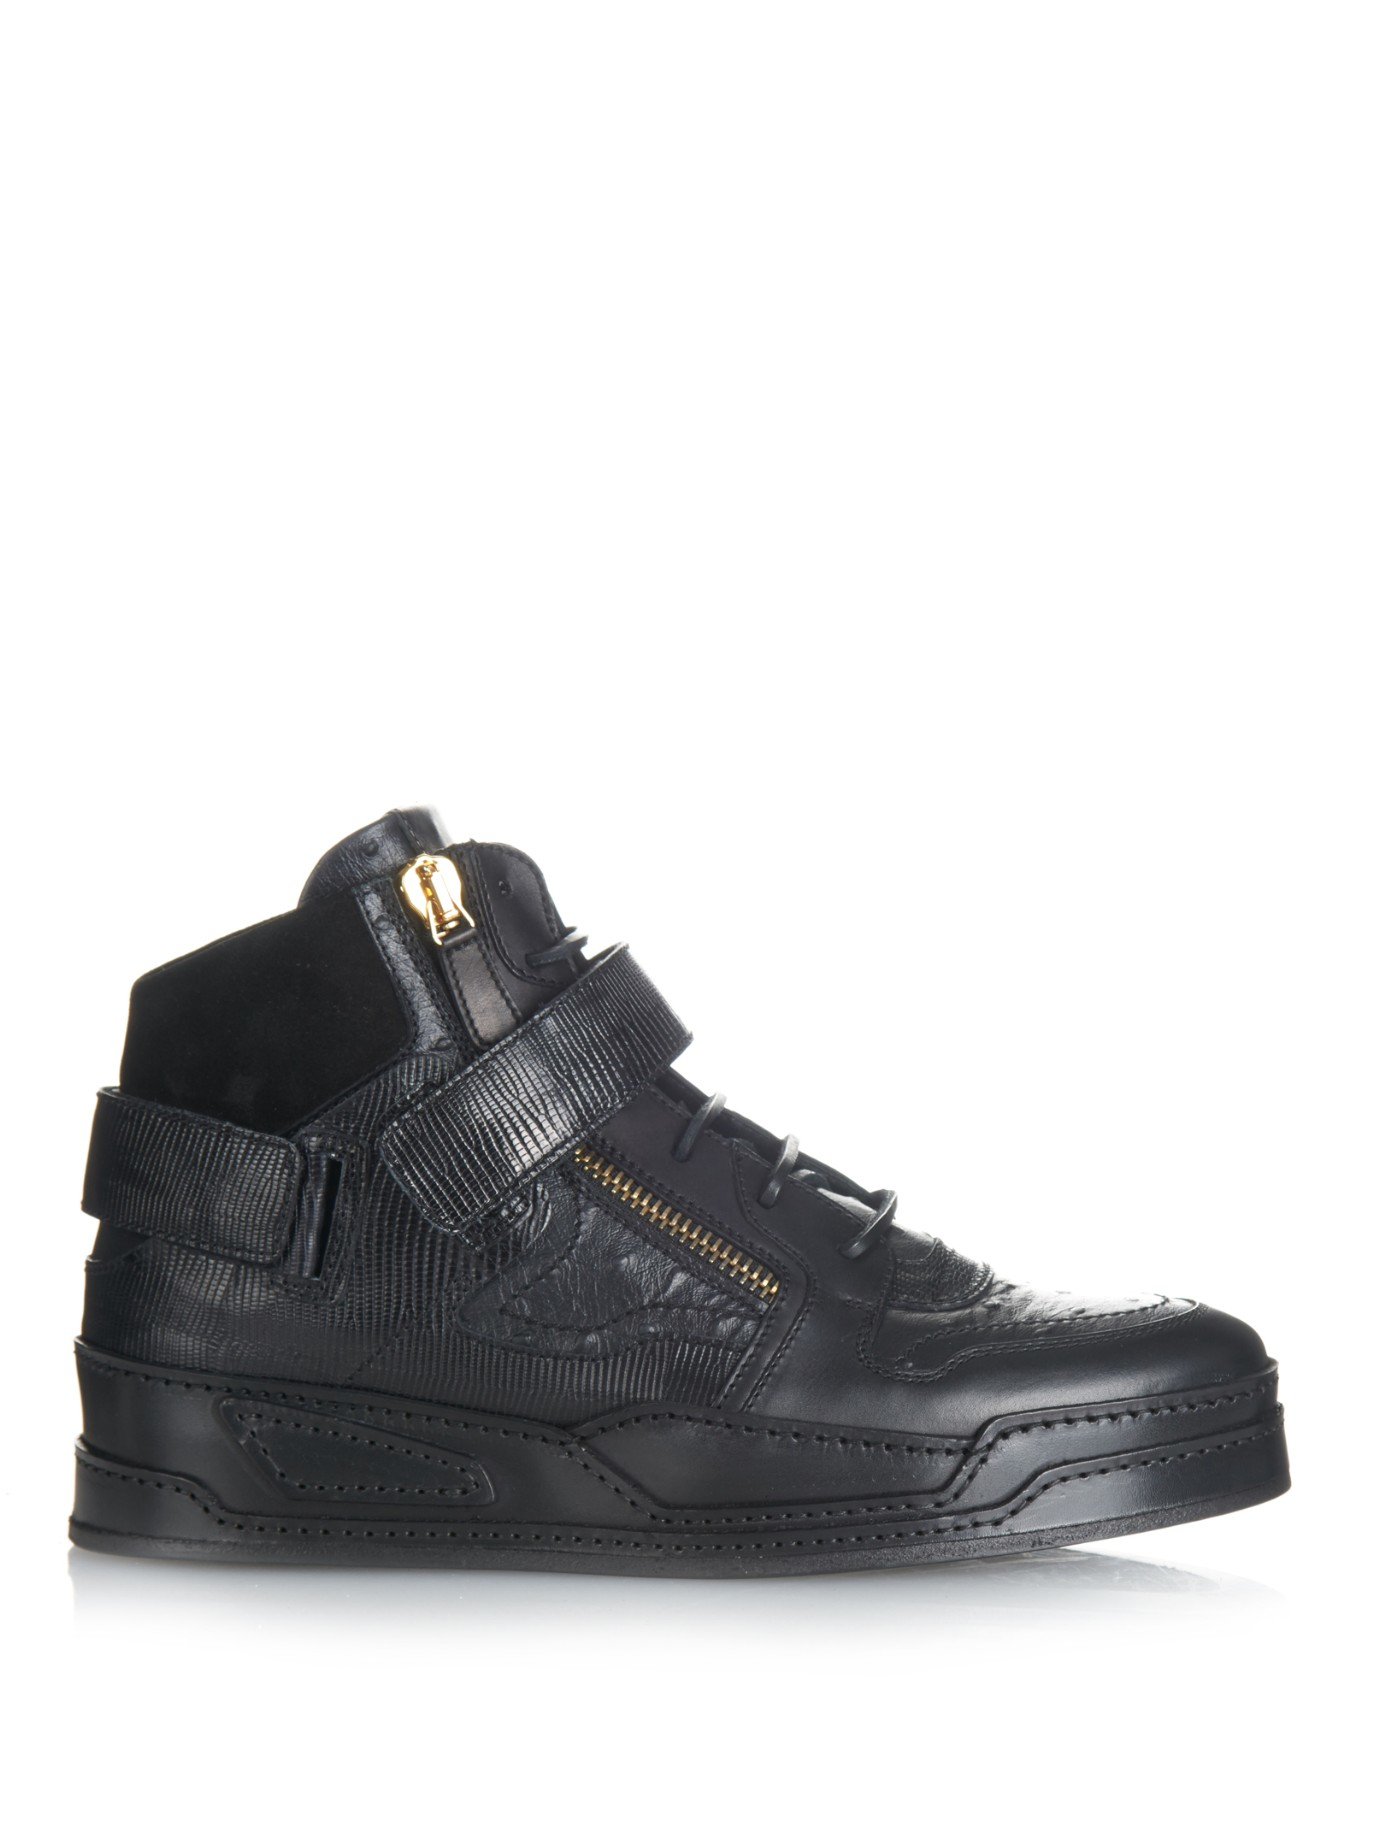 Versace Medusa High-top Leather Trainers in Black for Men | Lyst